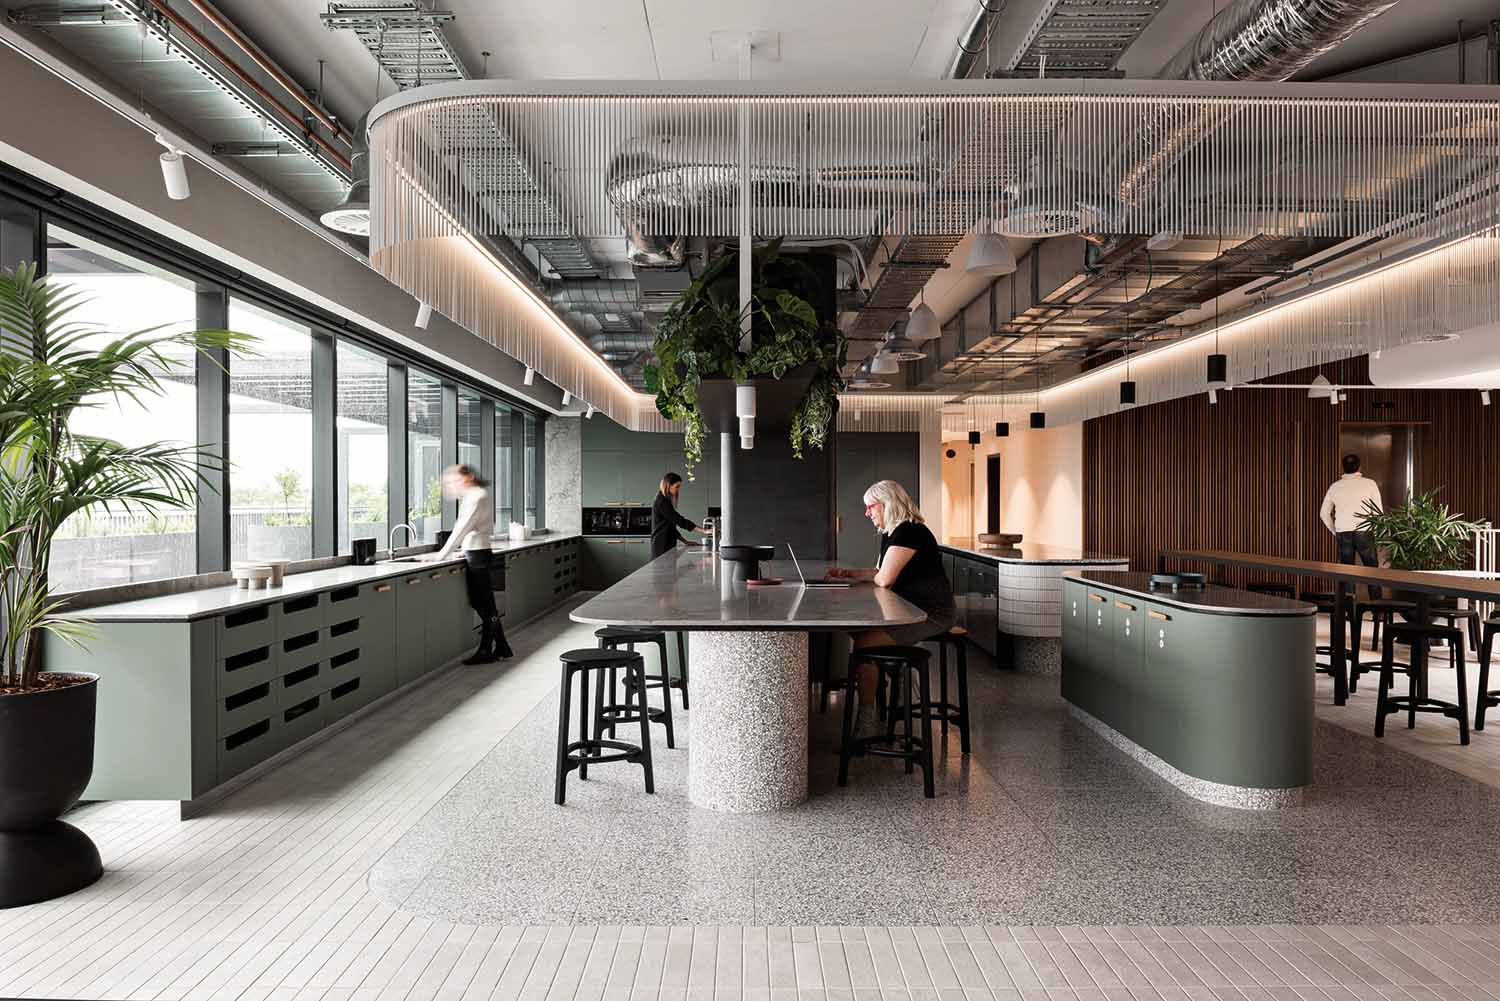 ABN Group HQ Leederville - © Dion Robeson, courtesy Woods Bagot | One of facility’s most generous communal spaces is the kitchen, conceived to create a domestic, family atmosphere that puts people at ease.